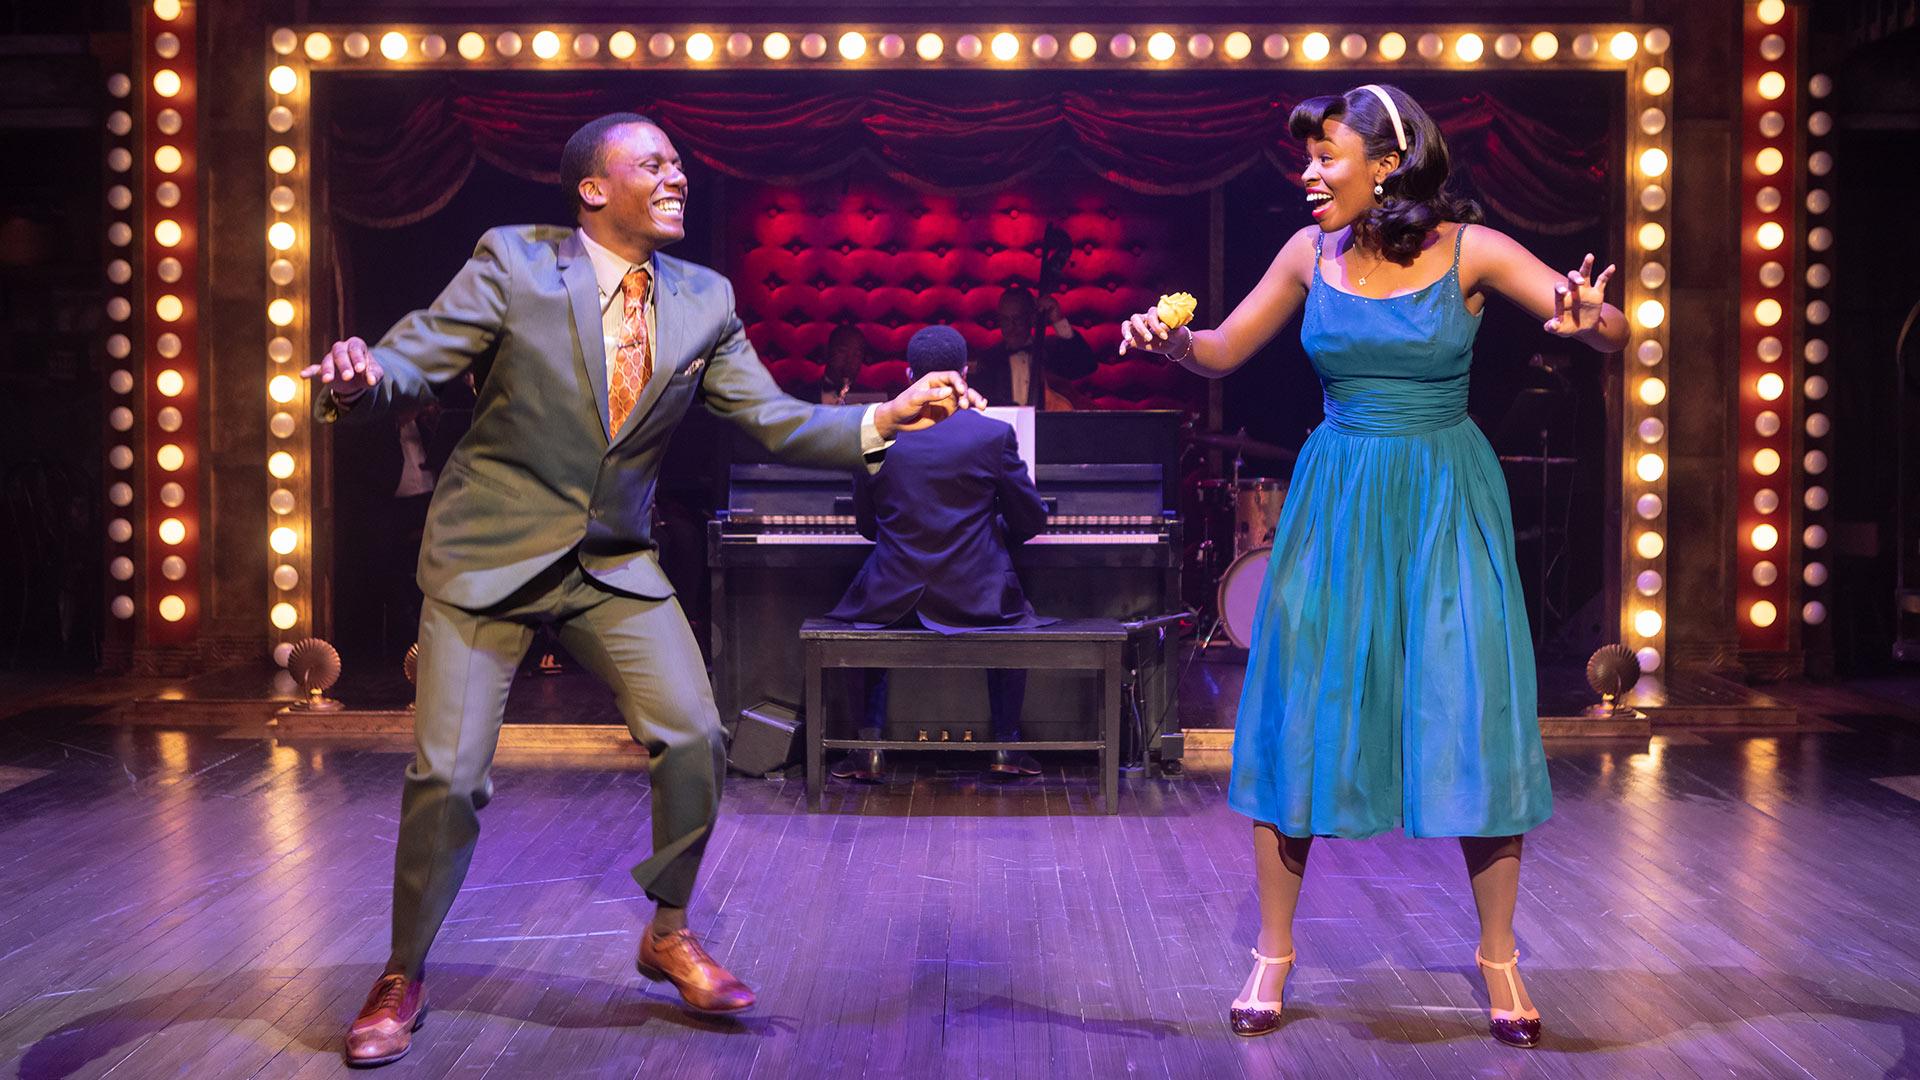 Solomon Parker III, left, and Korinn Walfall perform in "Ain’t Misbehavin’" at Signature Theatre. (Photo by Christopher Mueller via Maryland Today.)